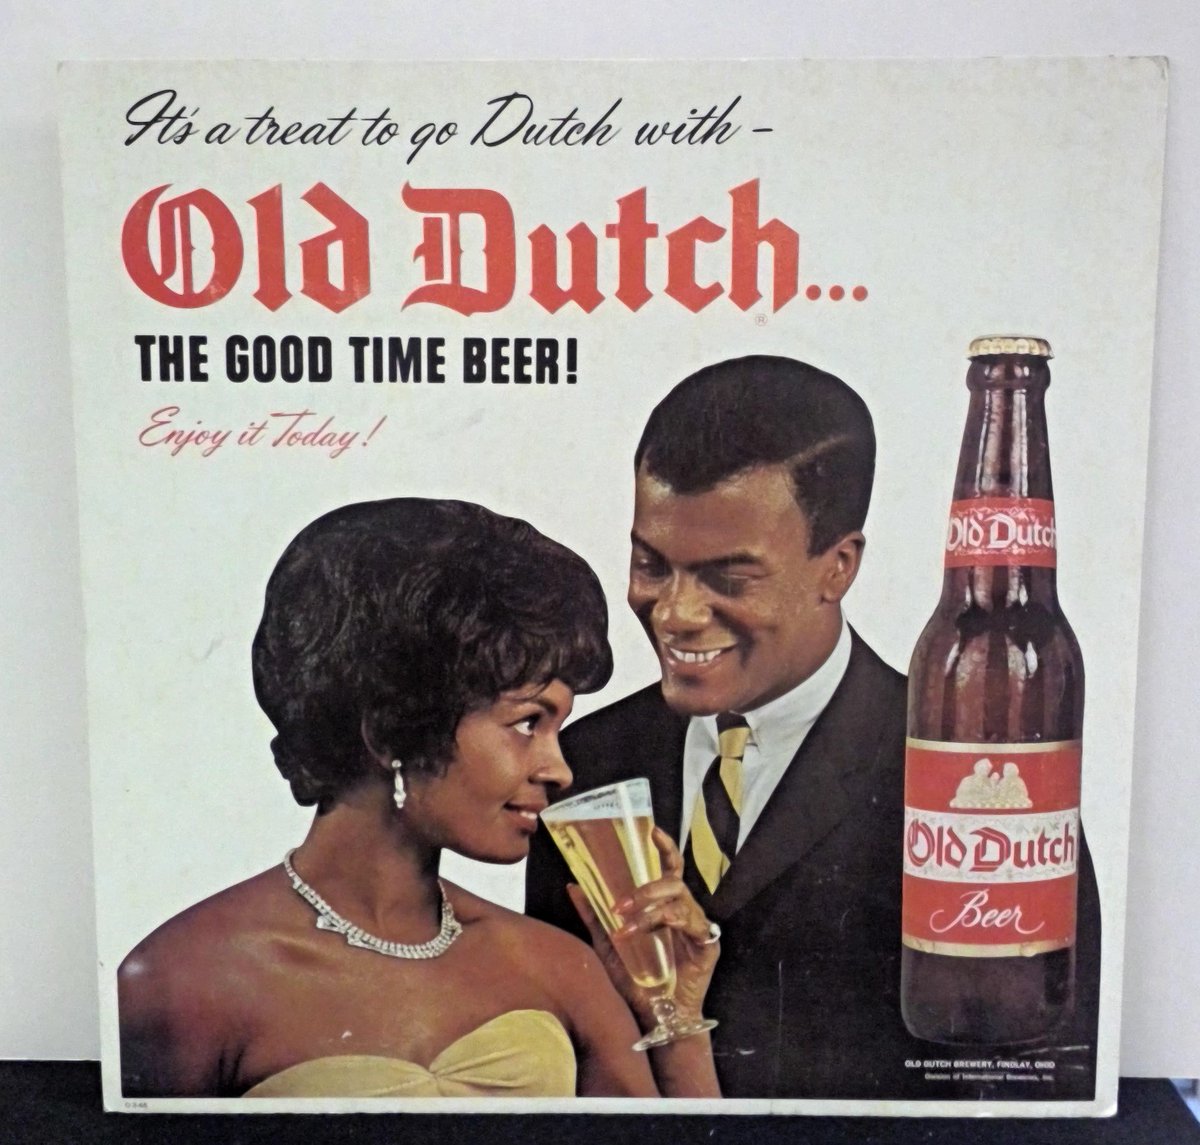 Northwest Ohio has had its share of breweries over the years too! Old Dutch Beer was brewed in Findlay in one form or another from 1891-1966. This mid-60s ad was from a period when the brewery was owned by International Breweries of Detriot.  #InternationalBeerDay